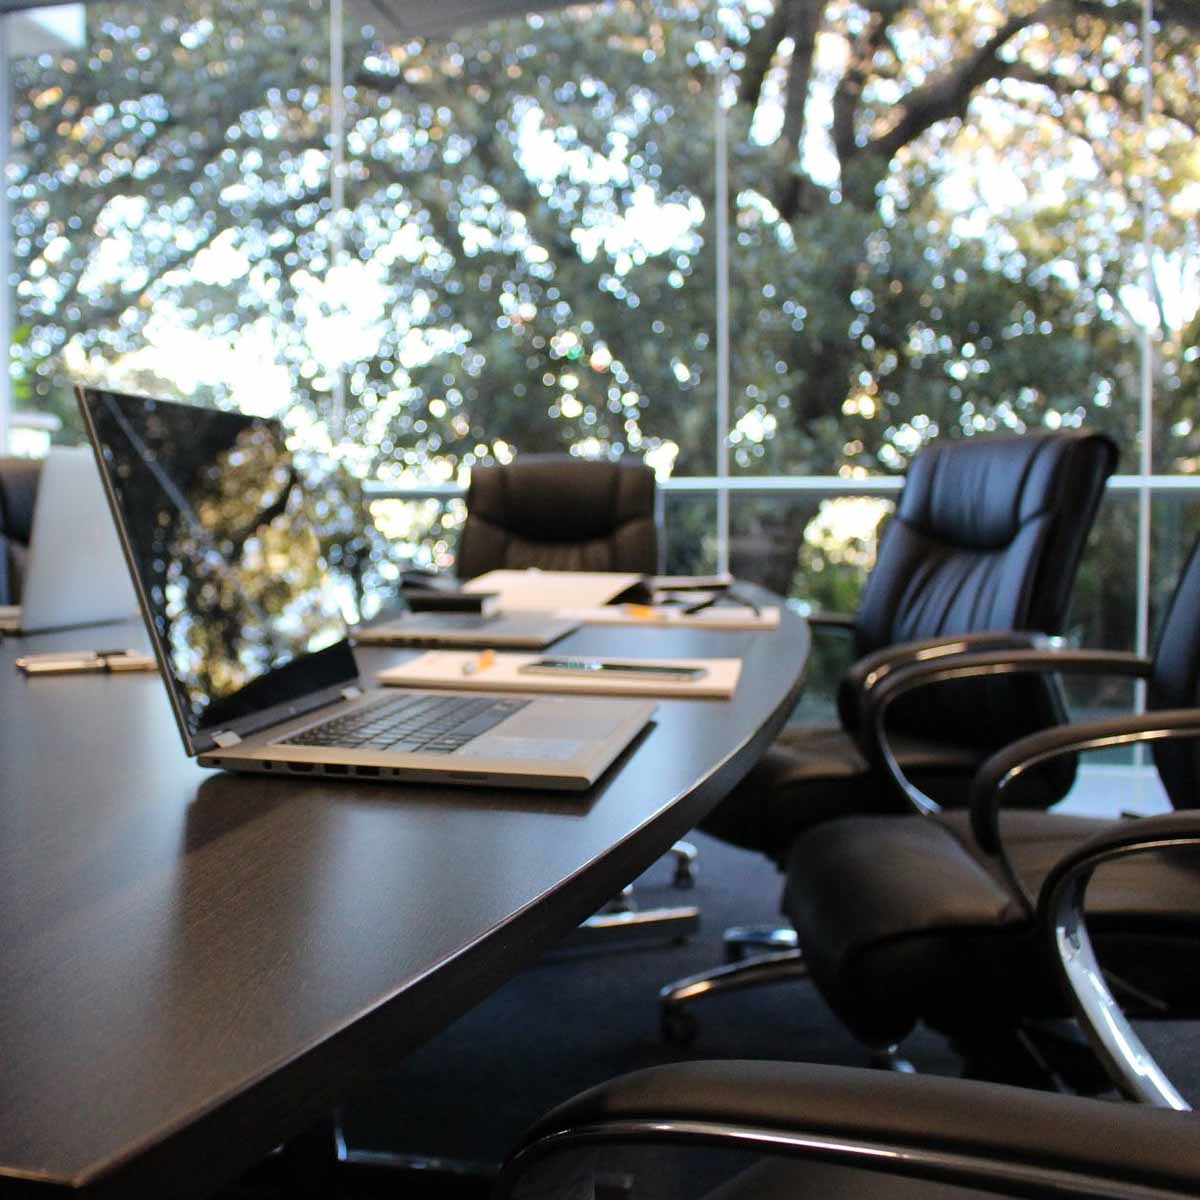 Open laptop computer on large Conference table in front of tall windows with trees outside